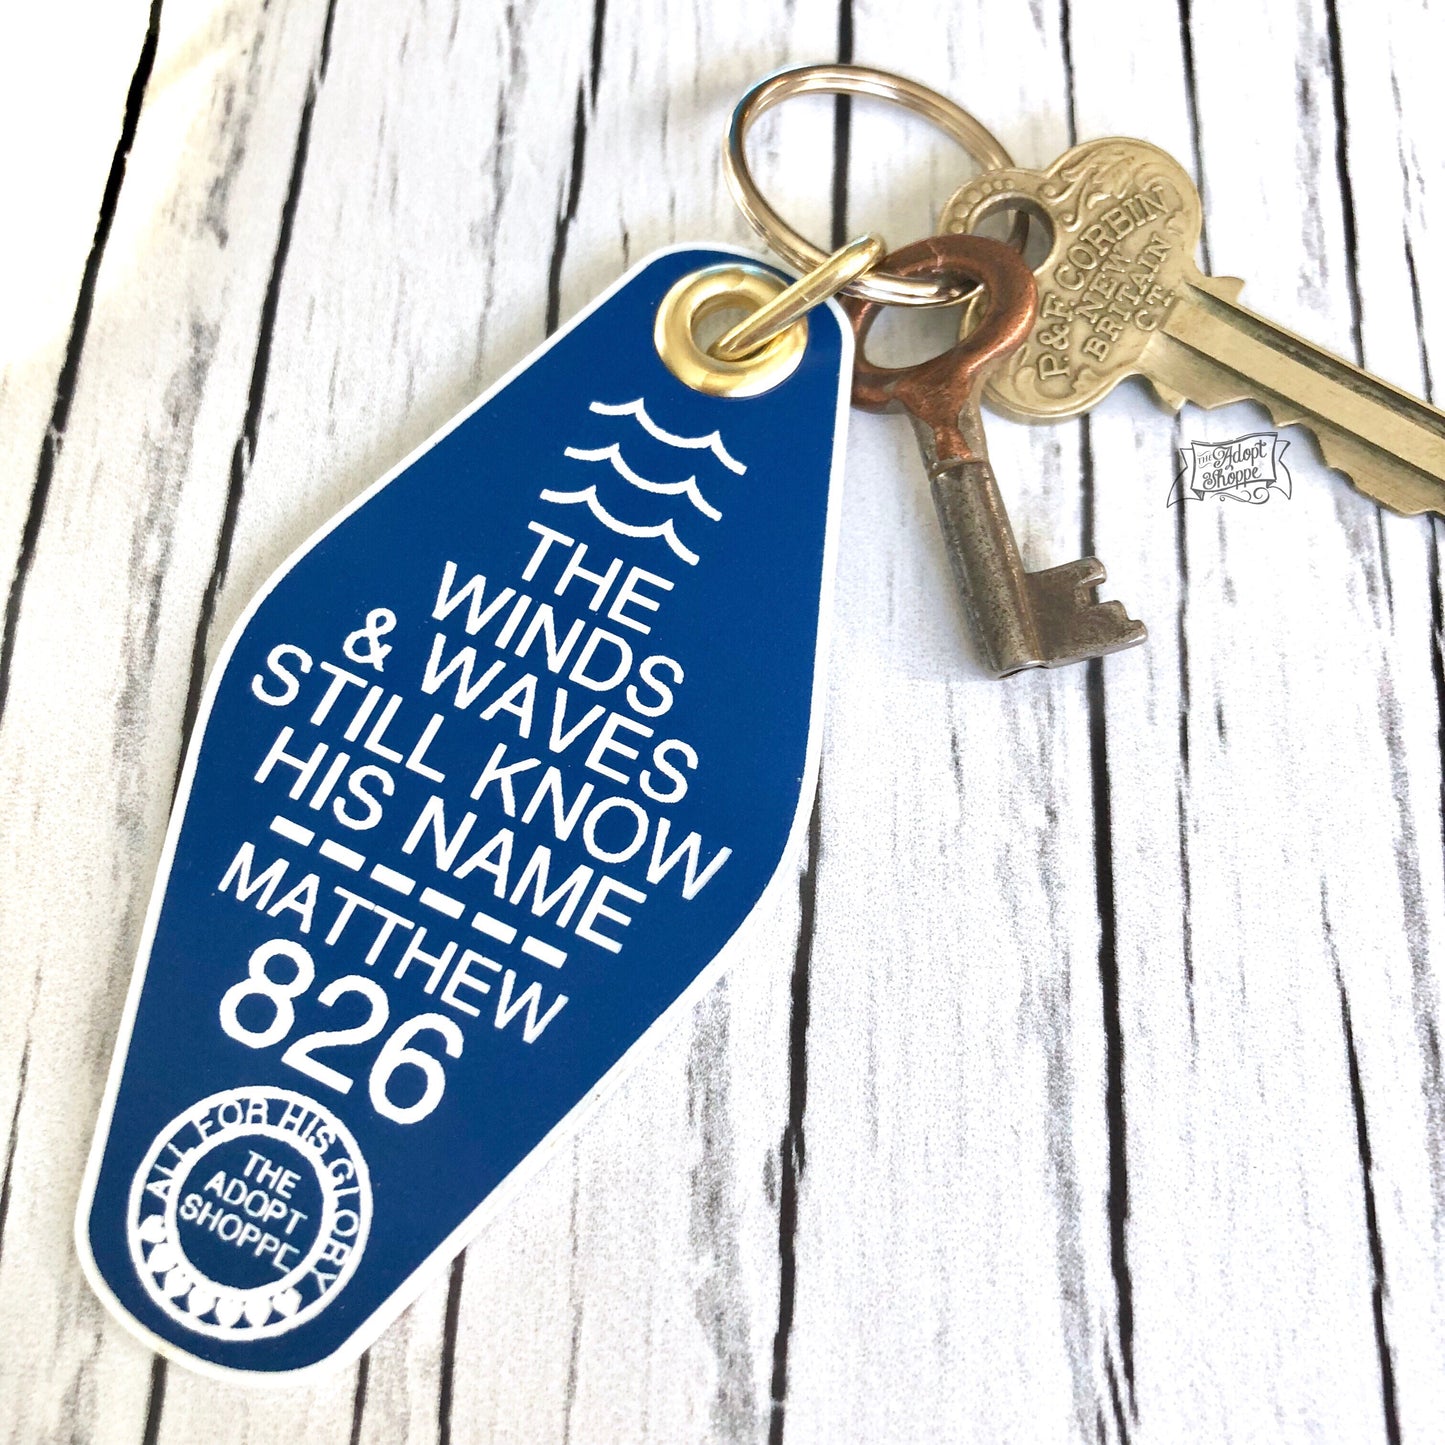 the winds and waves still know His name blue retro motel key tag fob